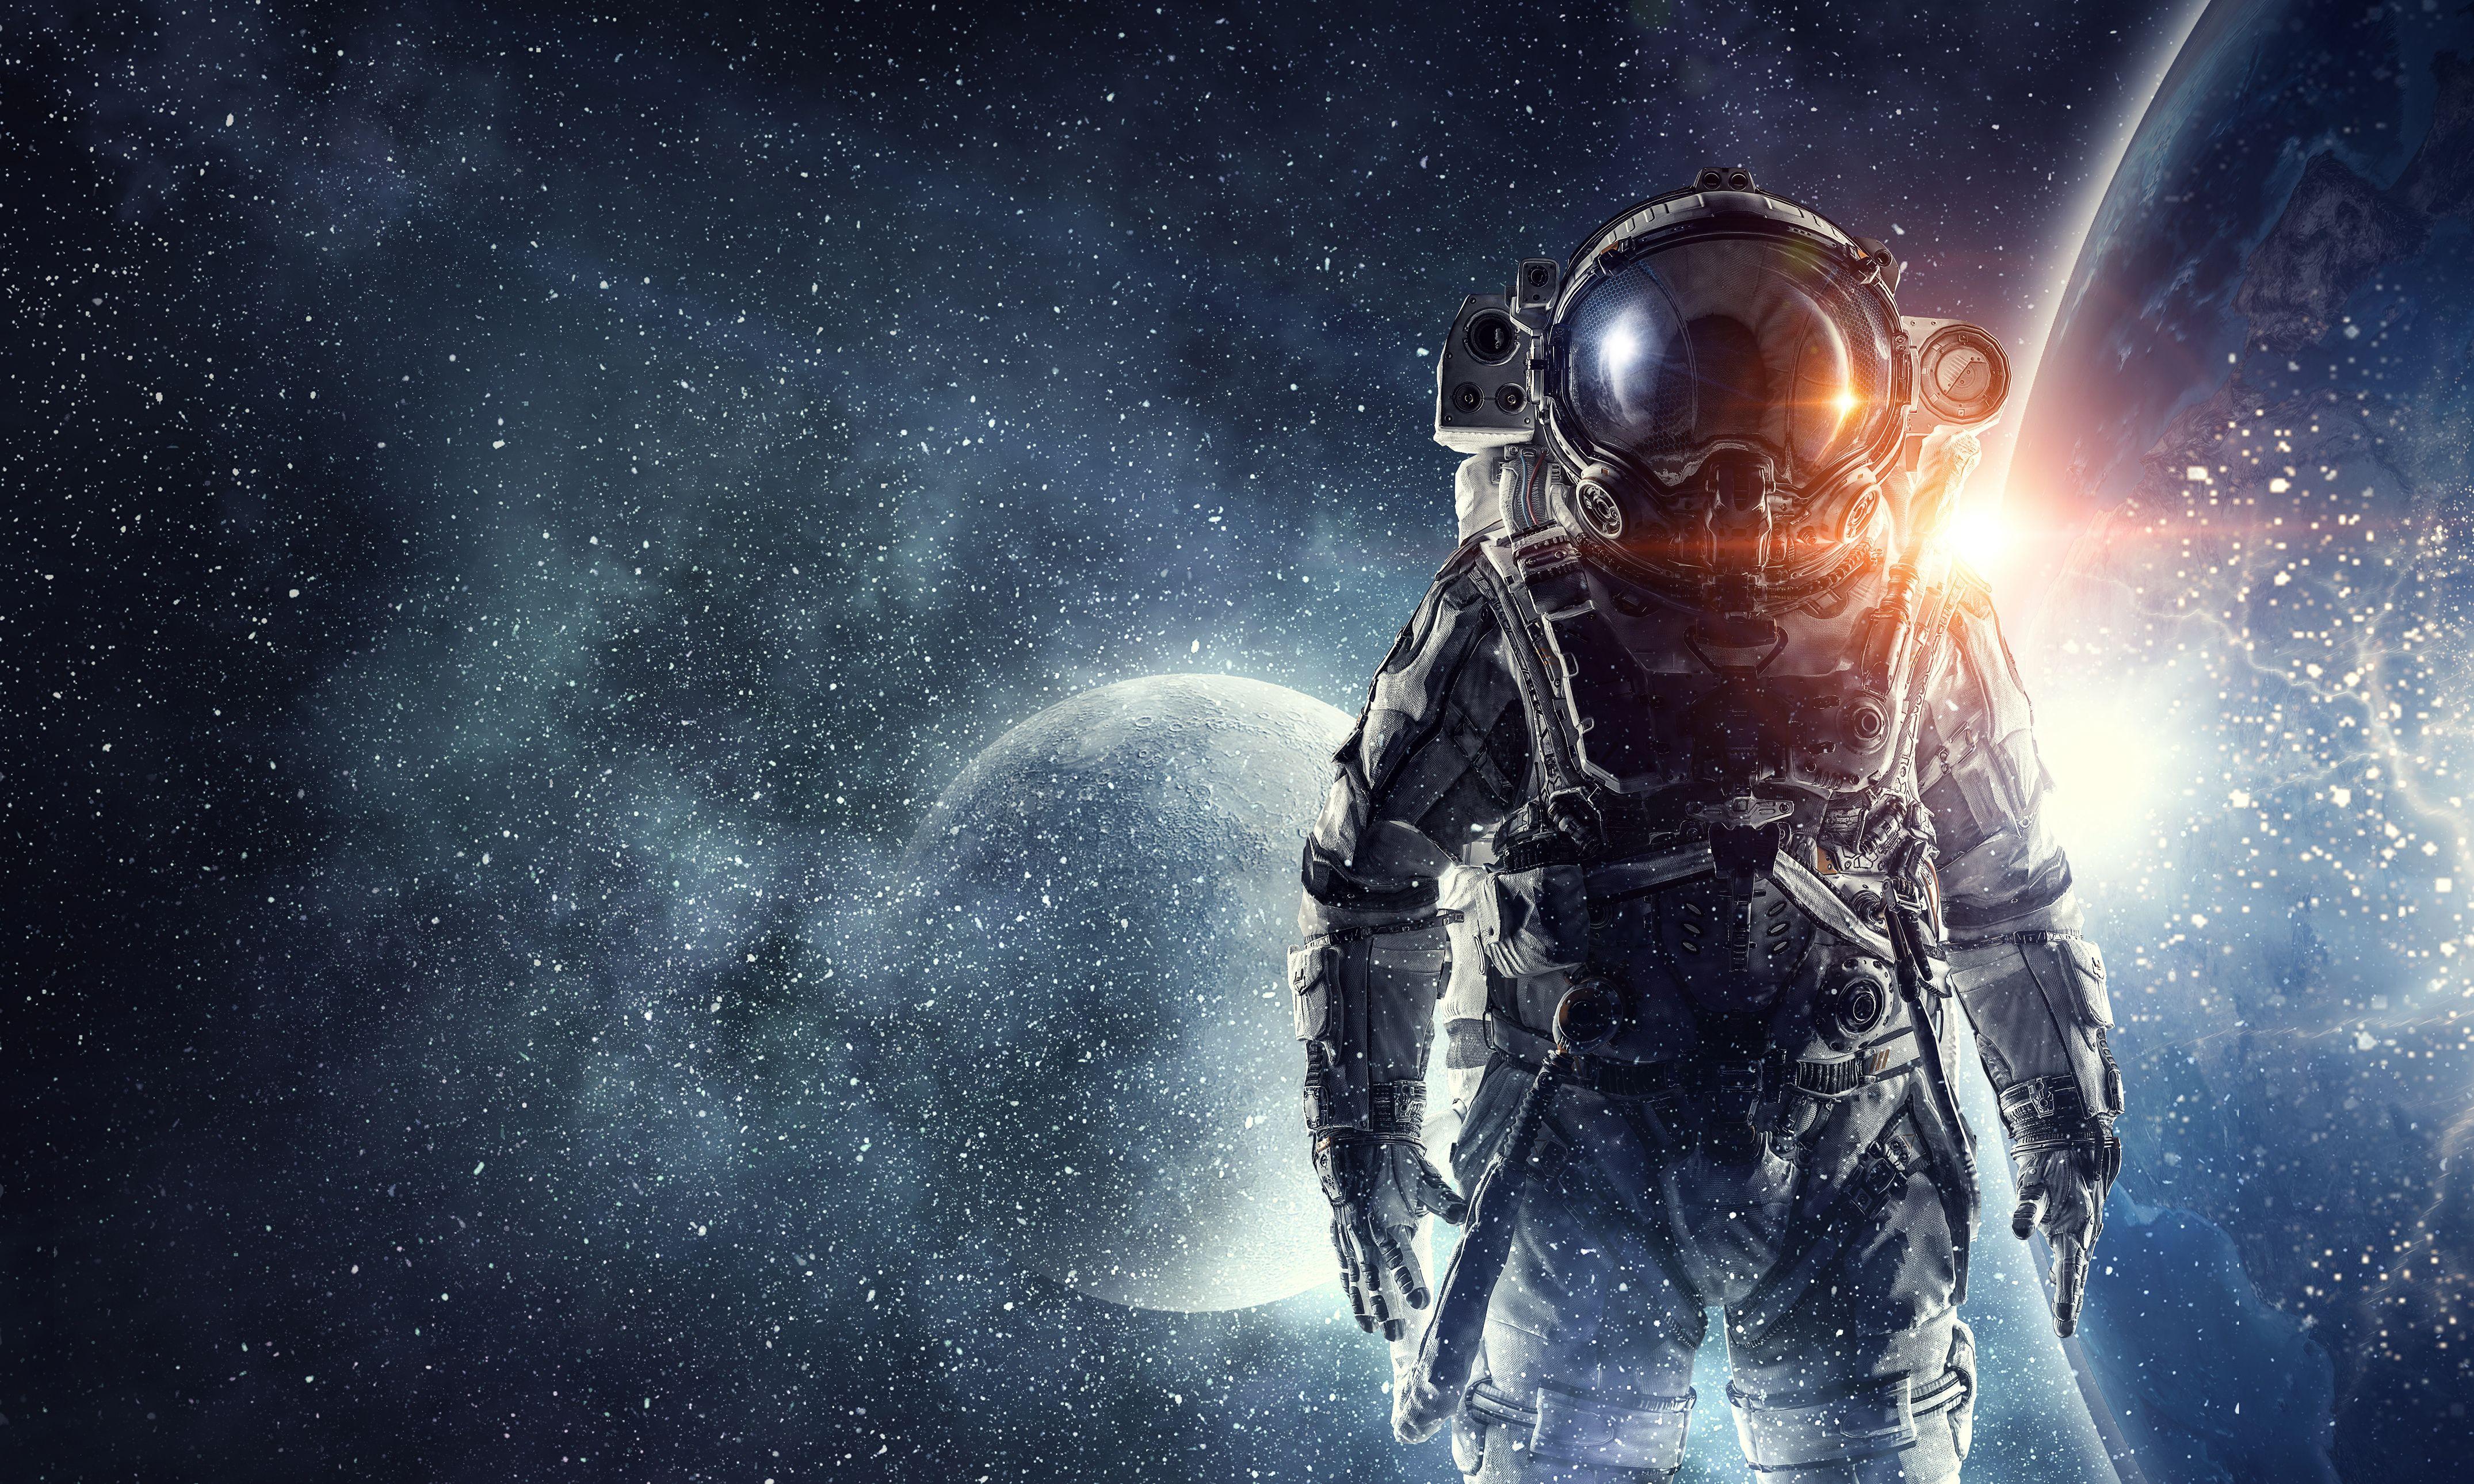 4k Astronaut Wallpapers Top Free 4k Astronaut Backgrounds Wallpaperaccess A collection of the top 37 4k astronaut wallpapers and backgrounds available for download for free. 4k astronaut wallpapers top free 4k